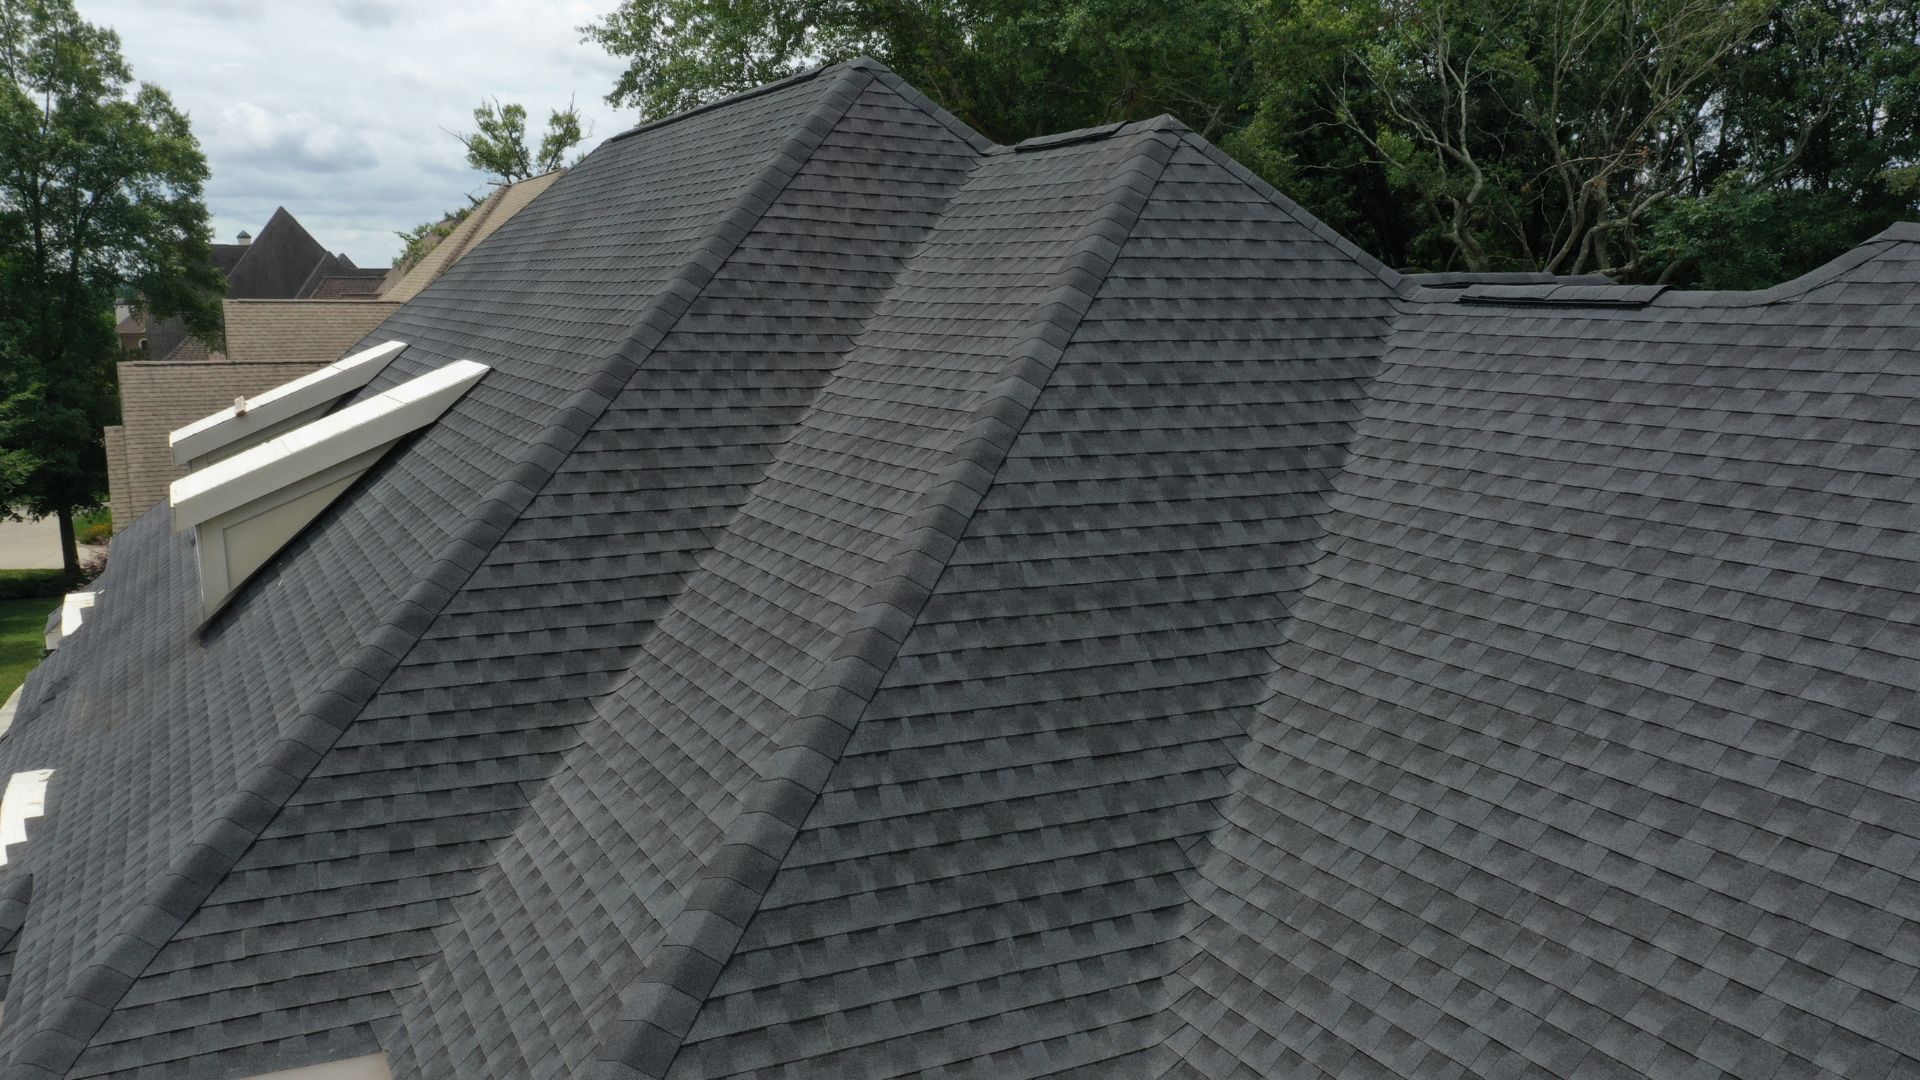 Choose a GAF-Certified Roofing Company